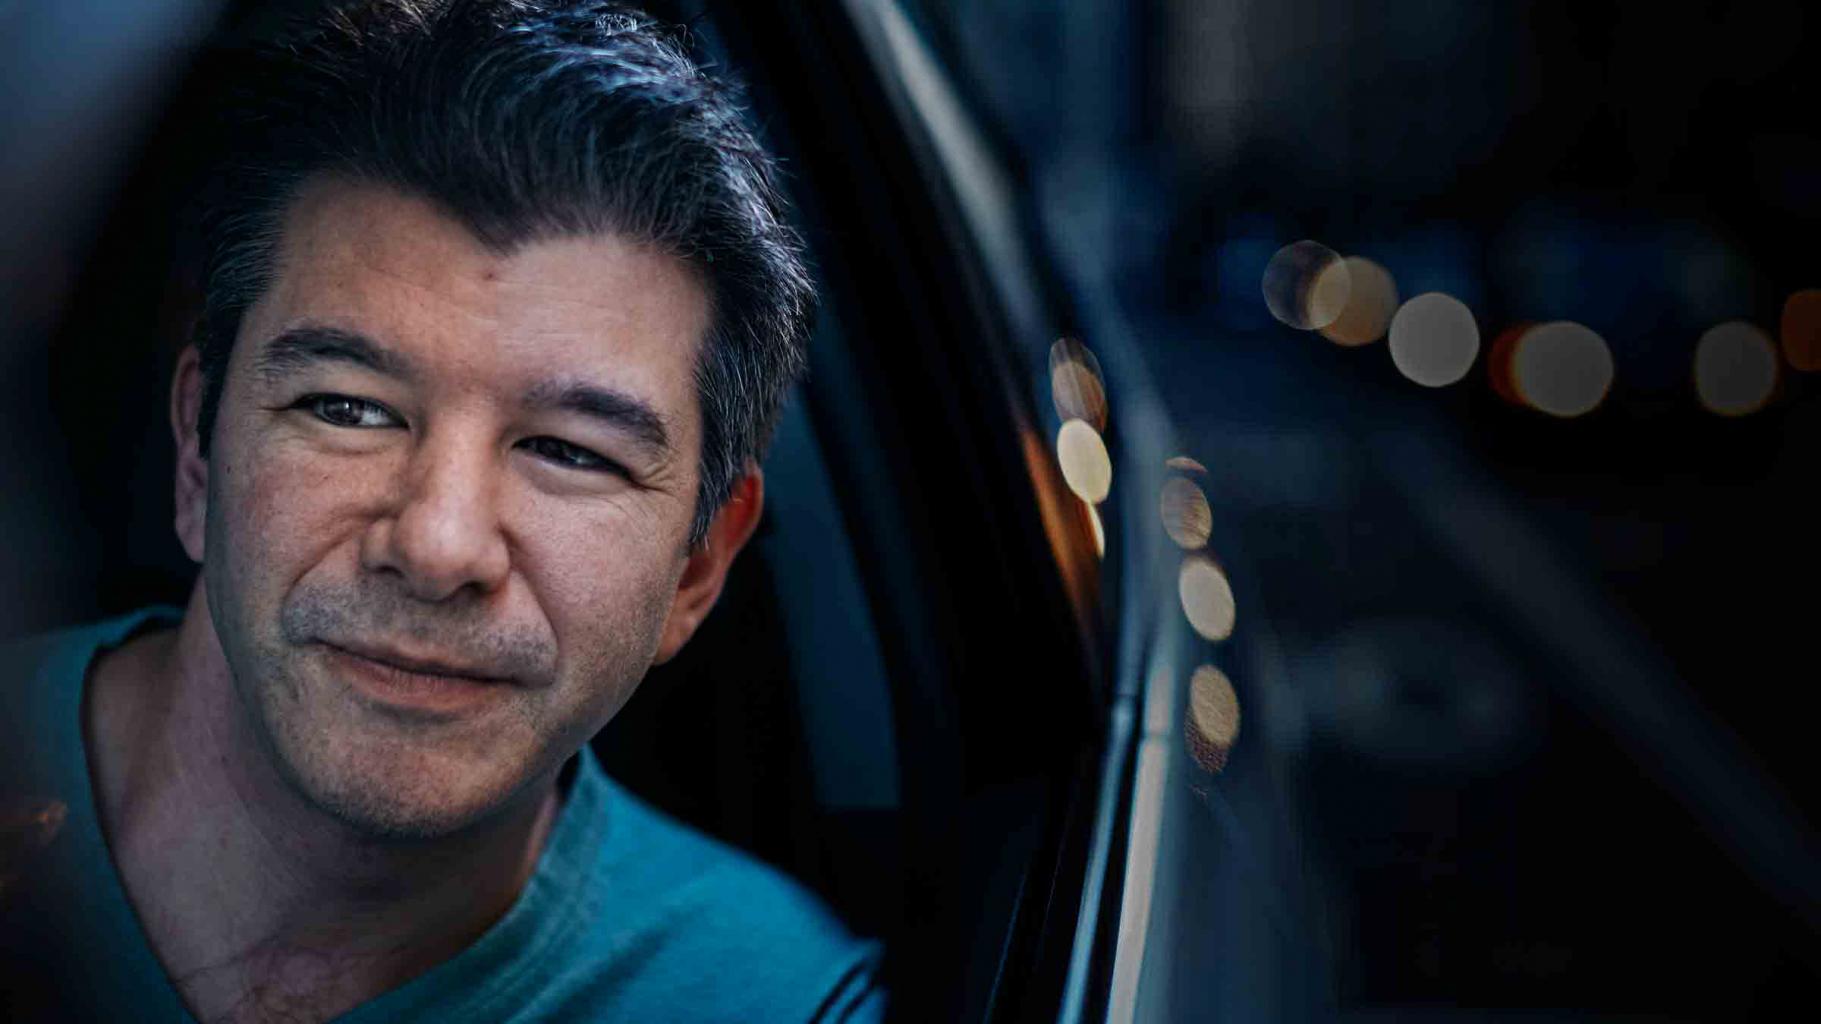 TIME Person Of The Year 2015 Runner-Up: Travis Kalanick